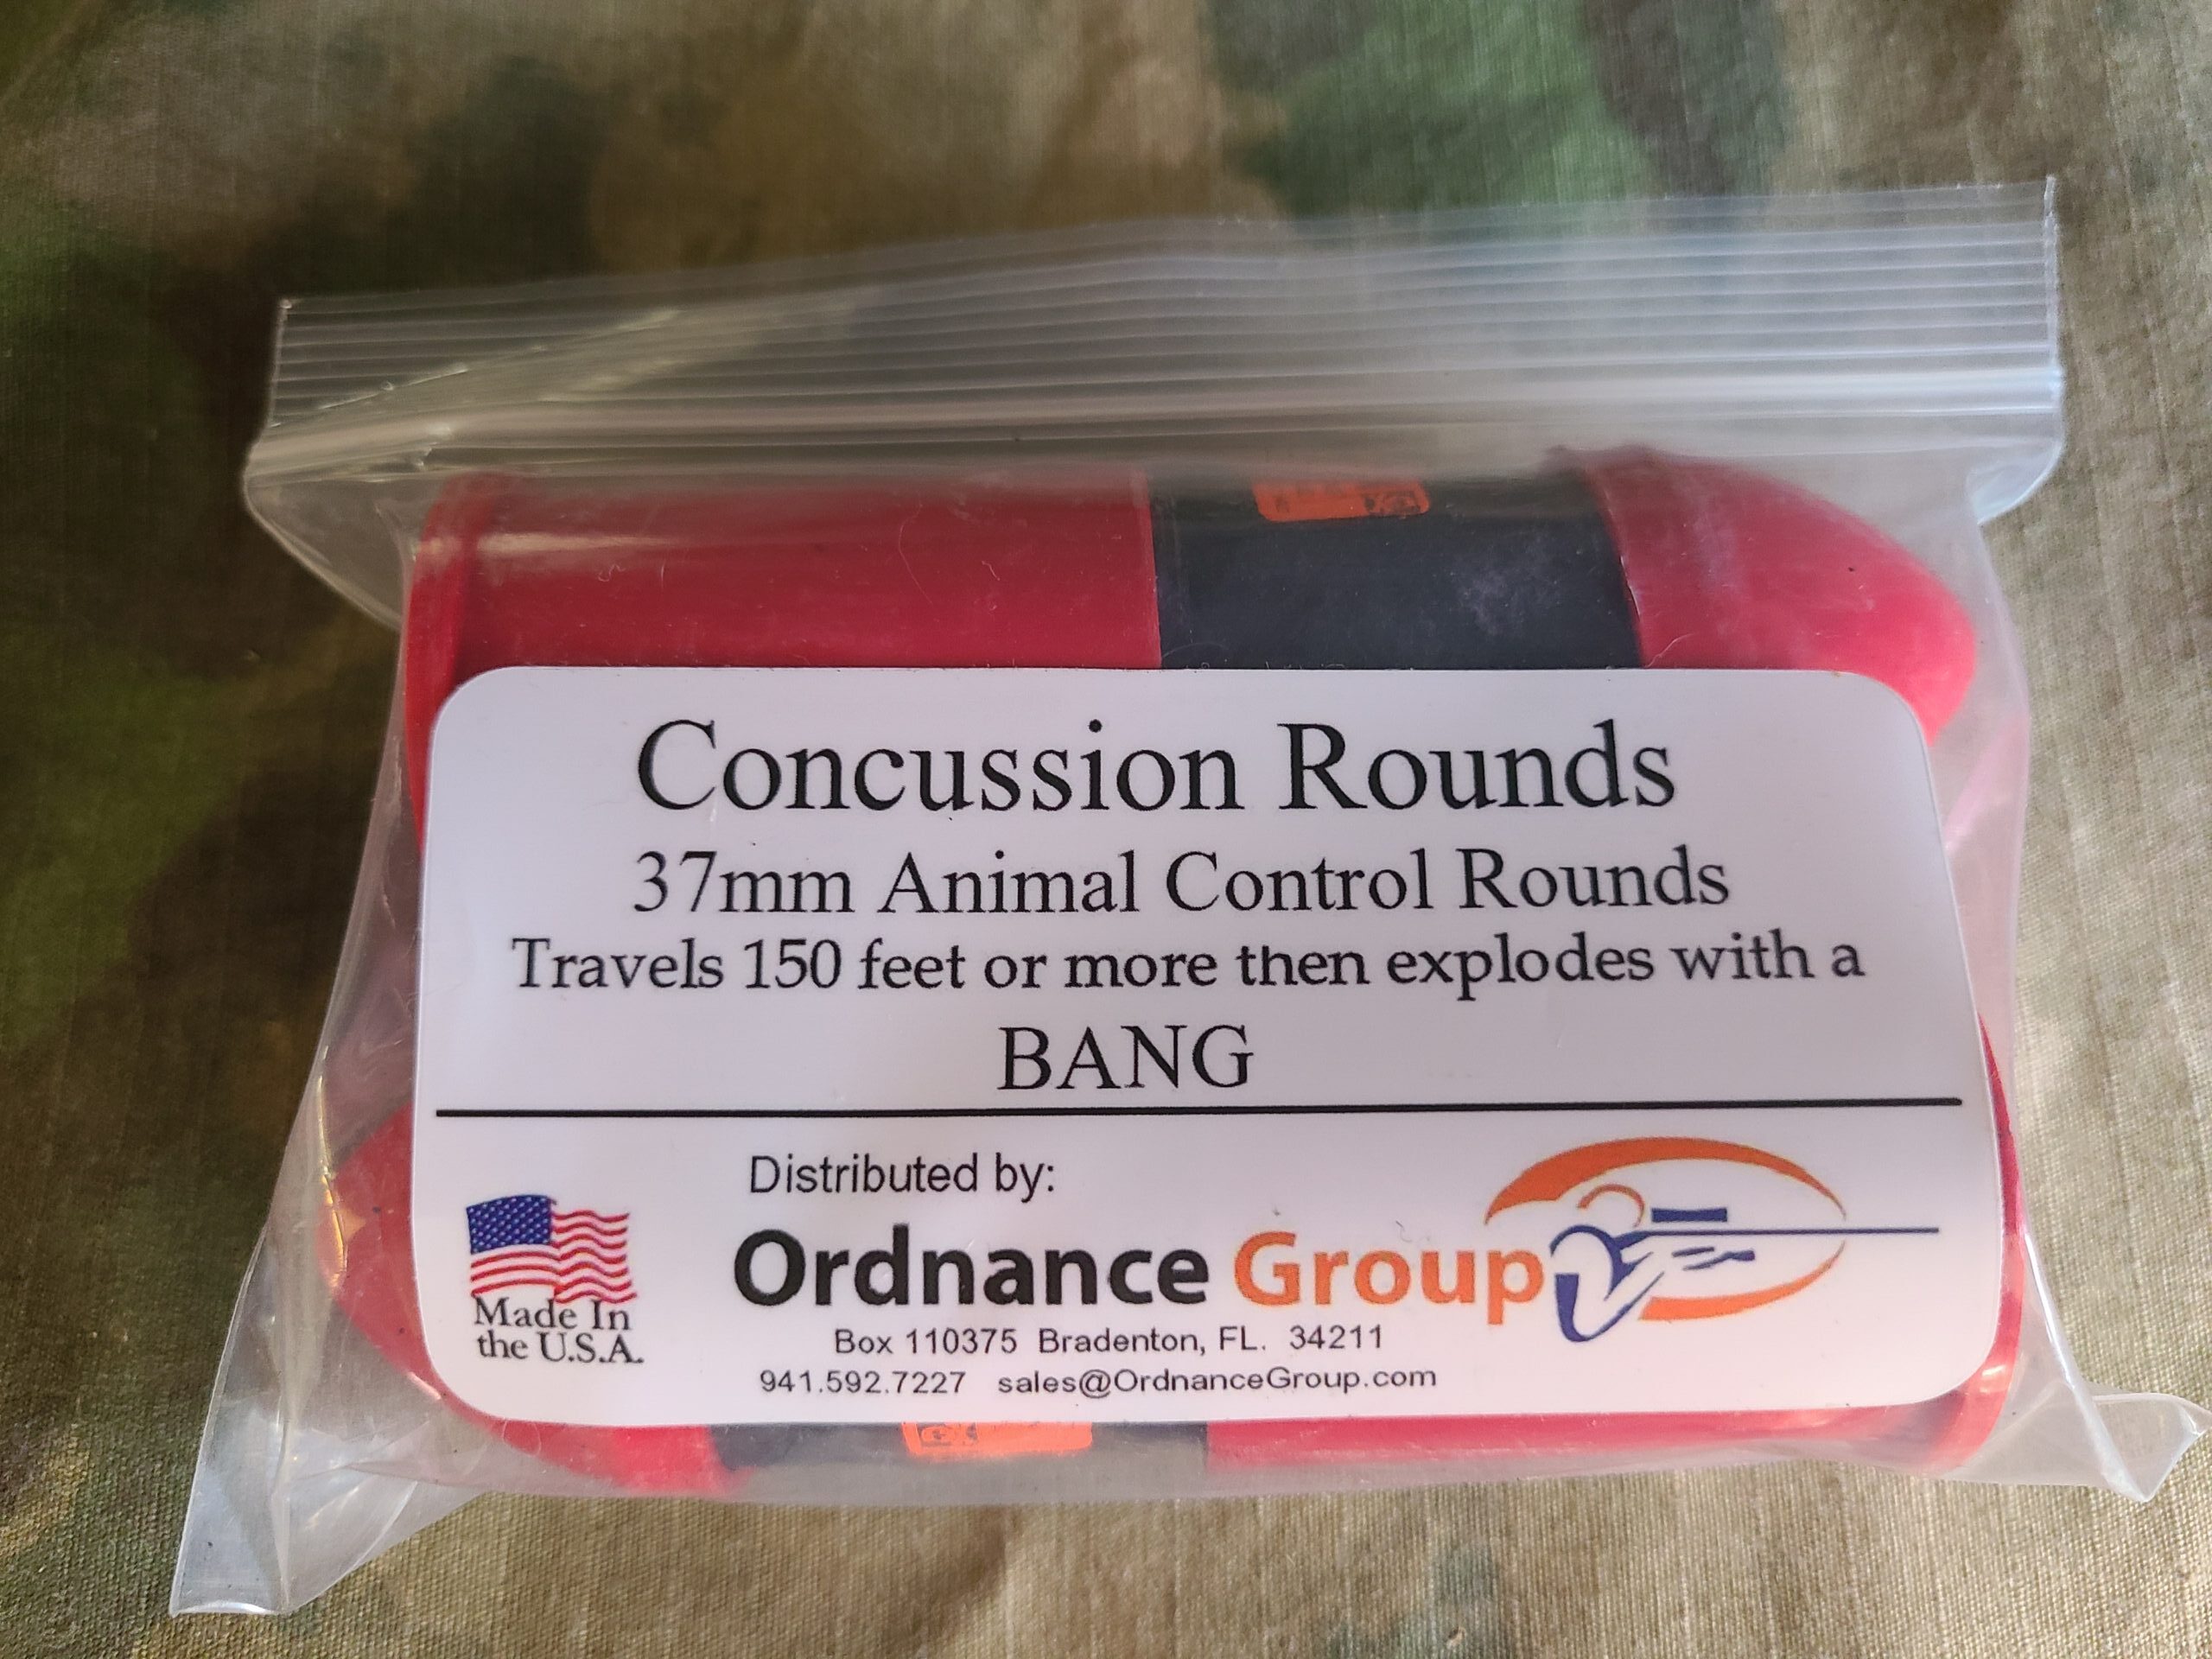 The Ordinance Group Concussion Rounds